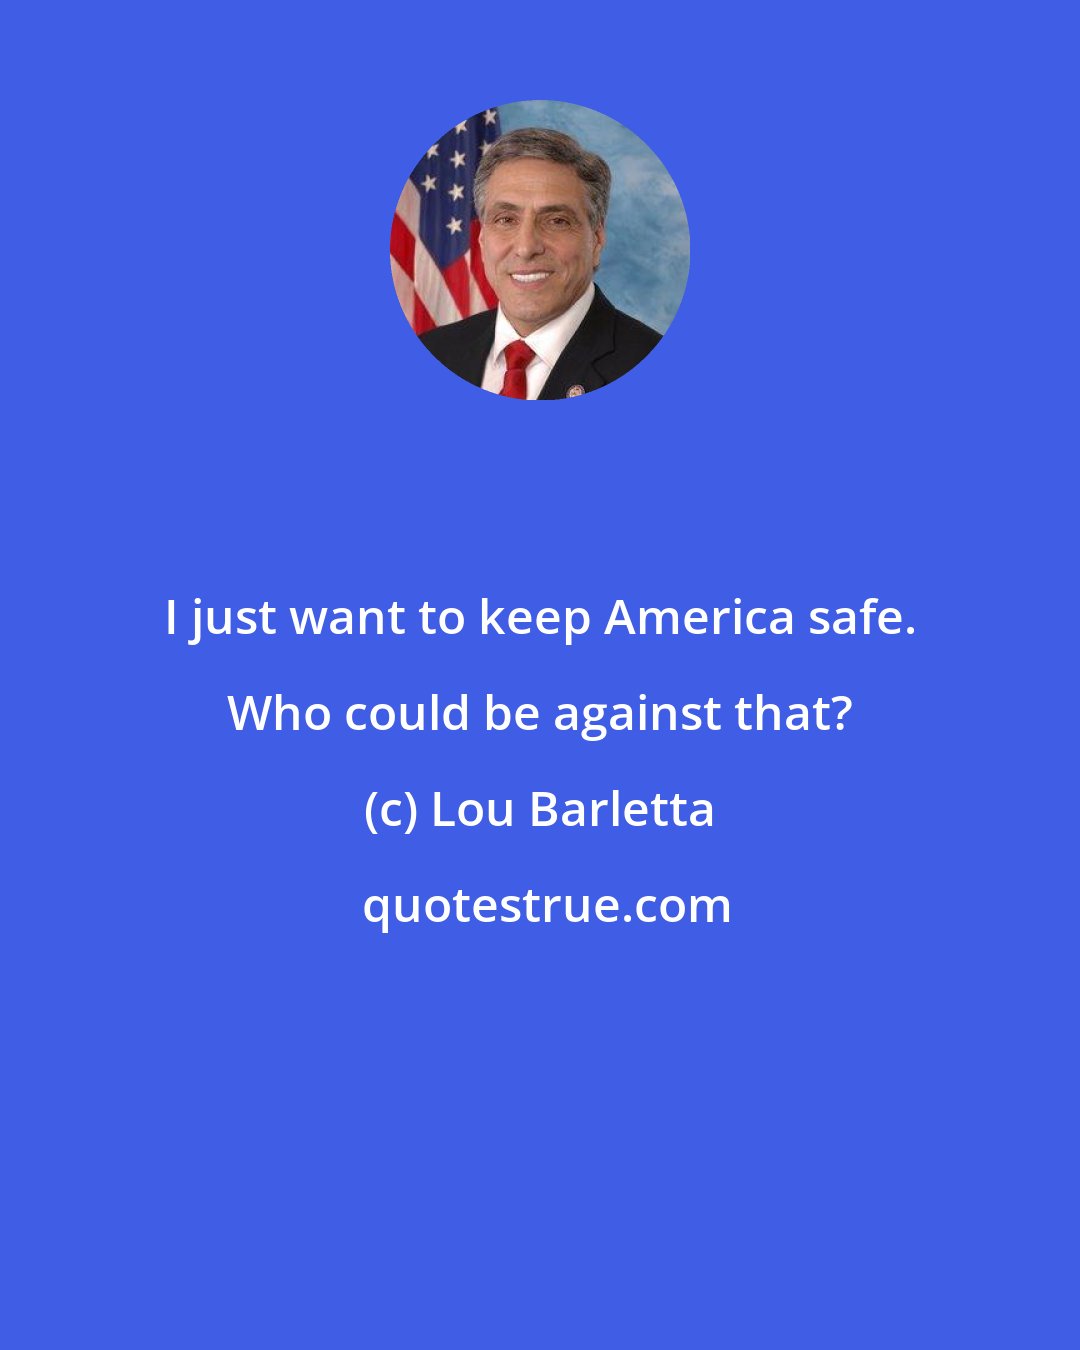 Lou Barletta: I just want to keep America safe. Who could be against that?